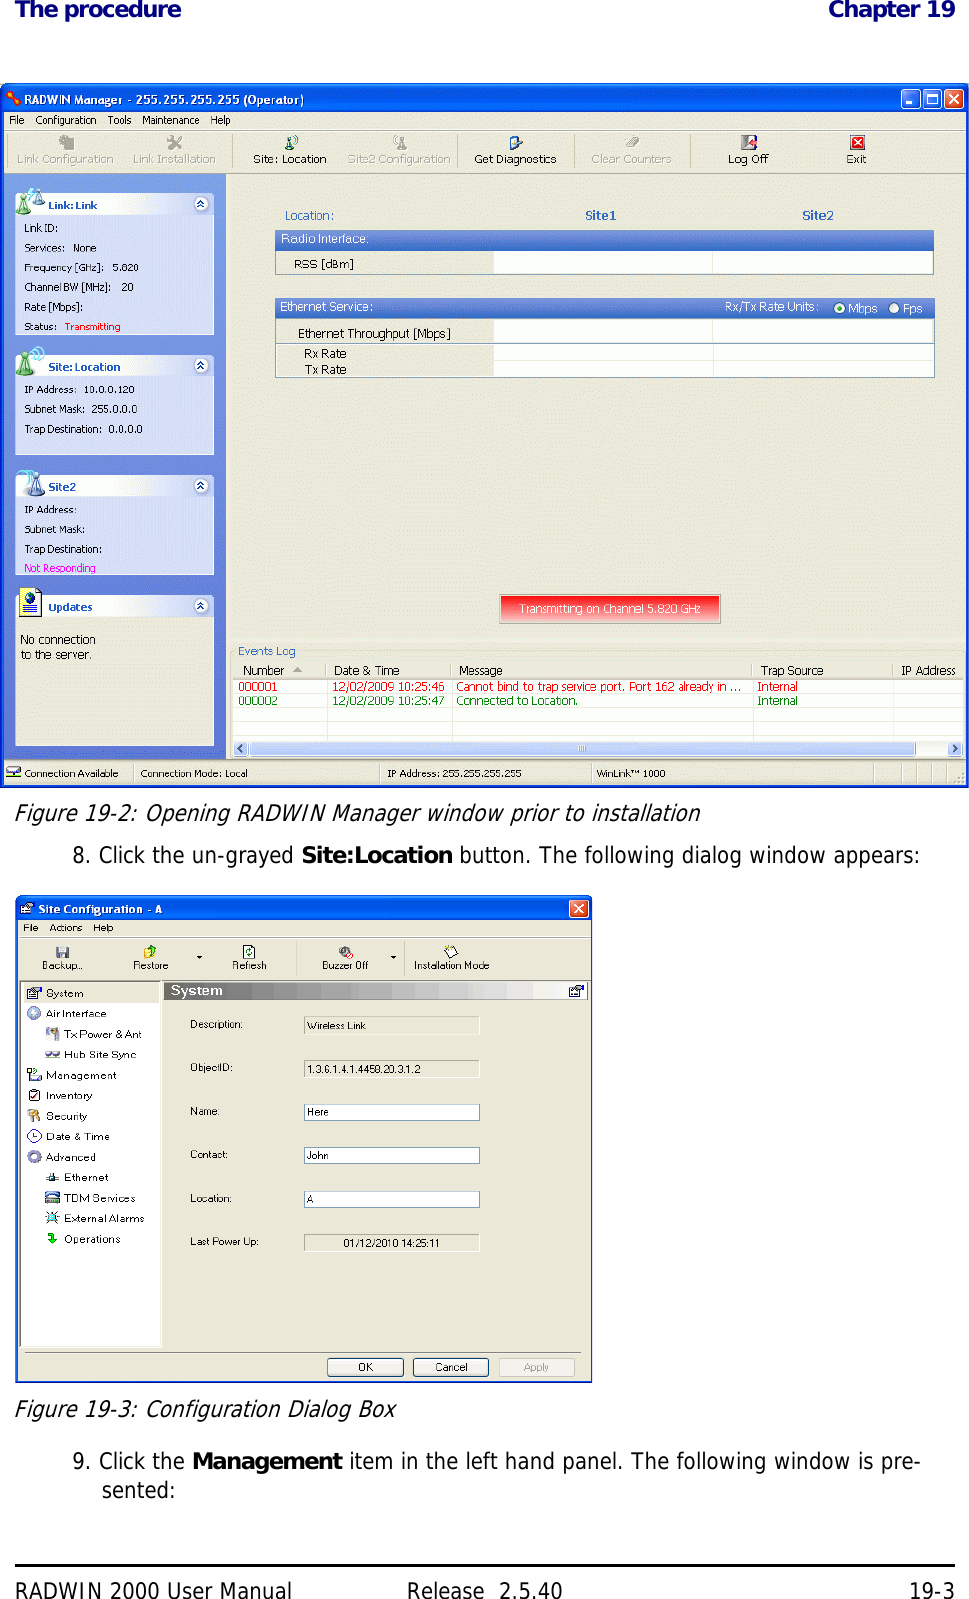 The procedure Chapter 19RADWIN 2000 User Manual Release  2.5.40 19-3Figure 19-2: Opening RADWIN Manager window prior to installation8. Click the un-grayed Site:Location button. The following dialog window appears:Figure 19-3: Configuration Dialog Box9. Click the Management item in the left hand panel. The following window is pre-sented: